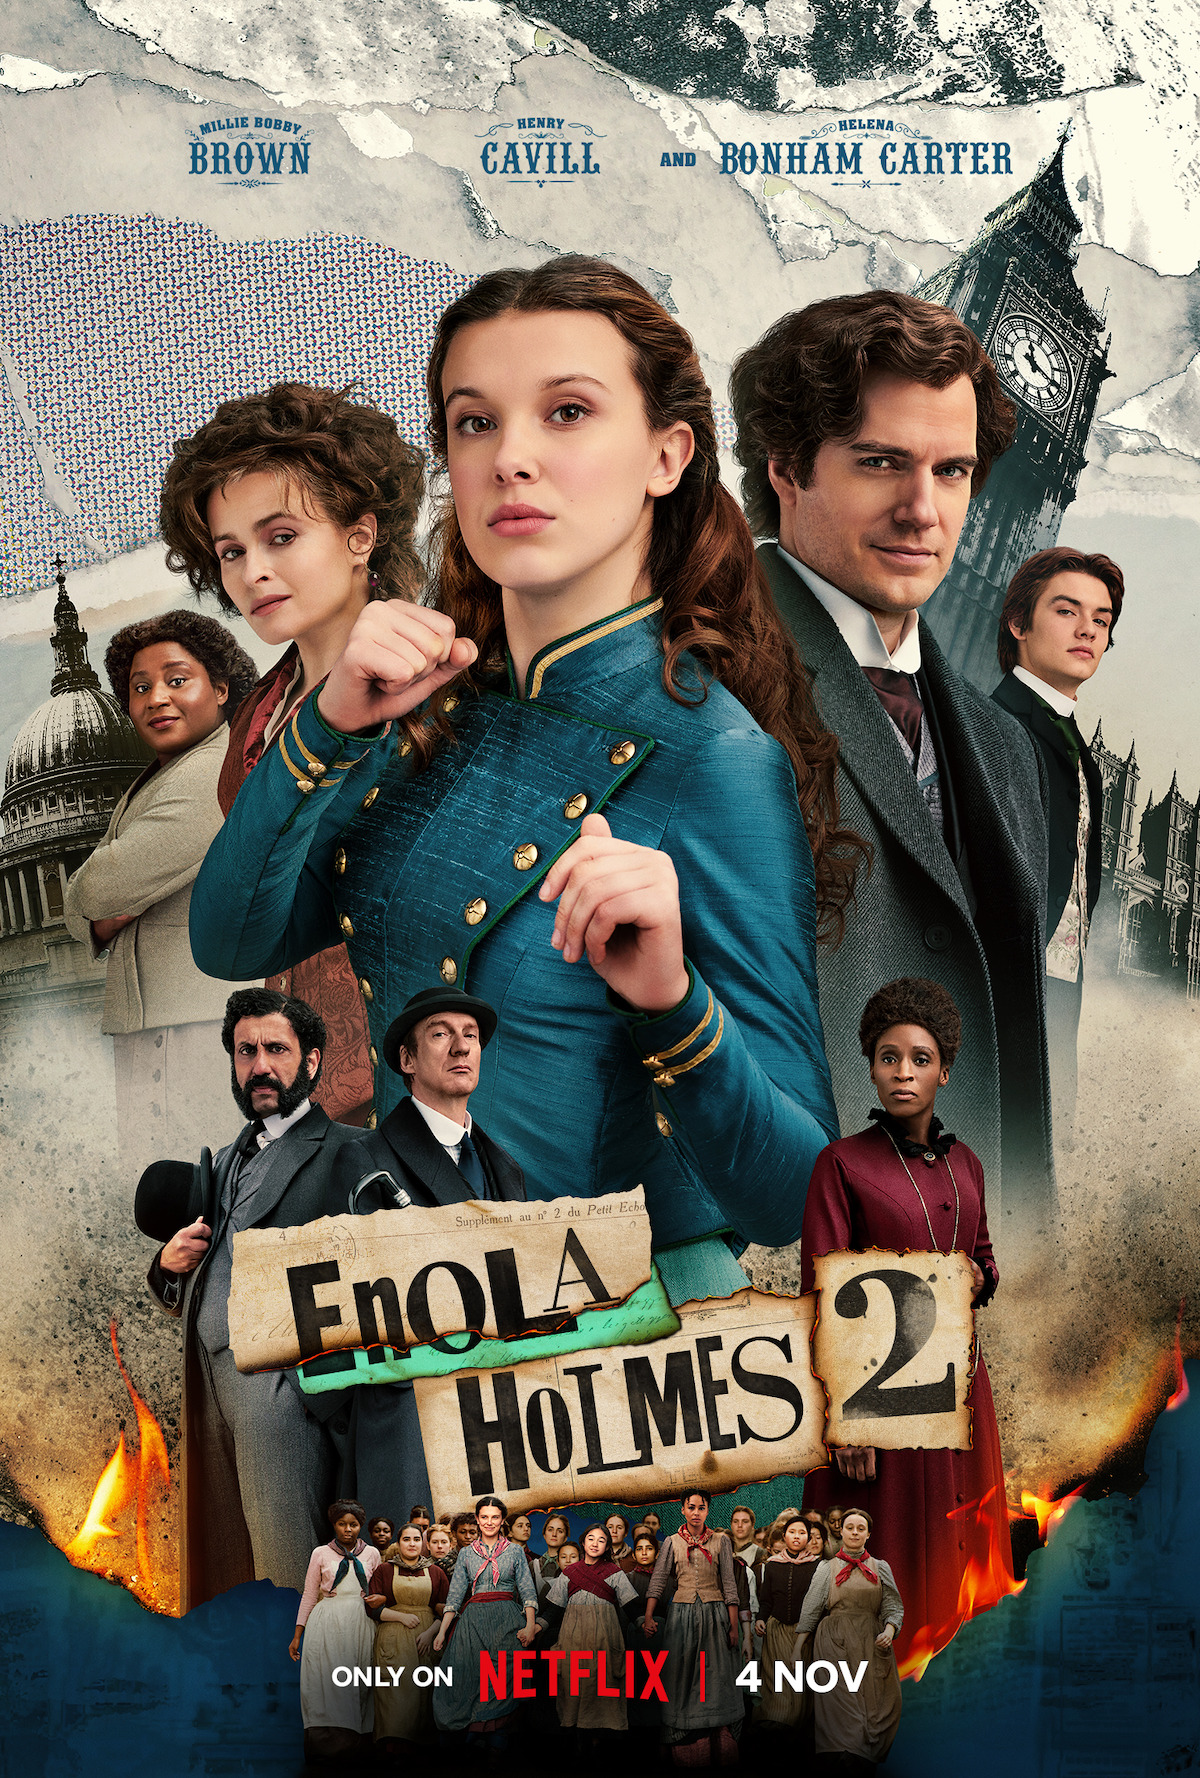 Best new family movies on Netflix? 'Enola Holmes 2' is excellent